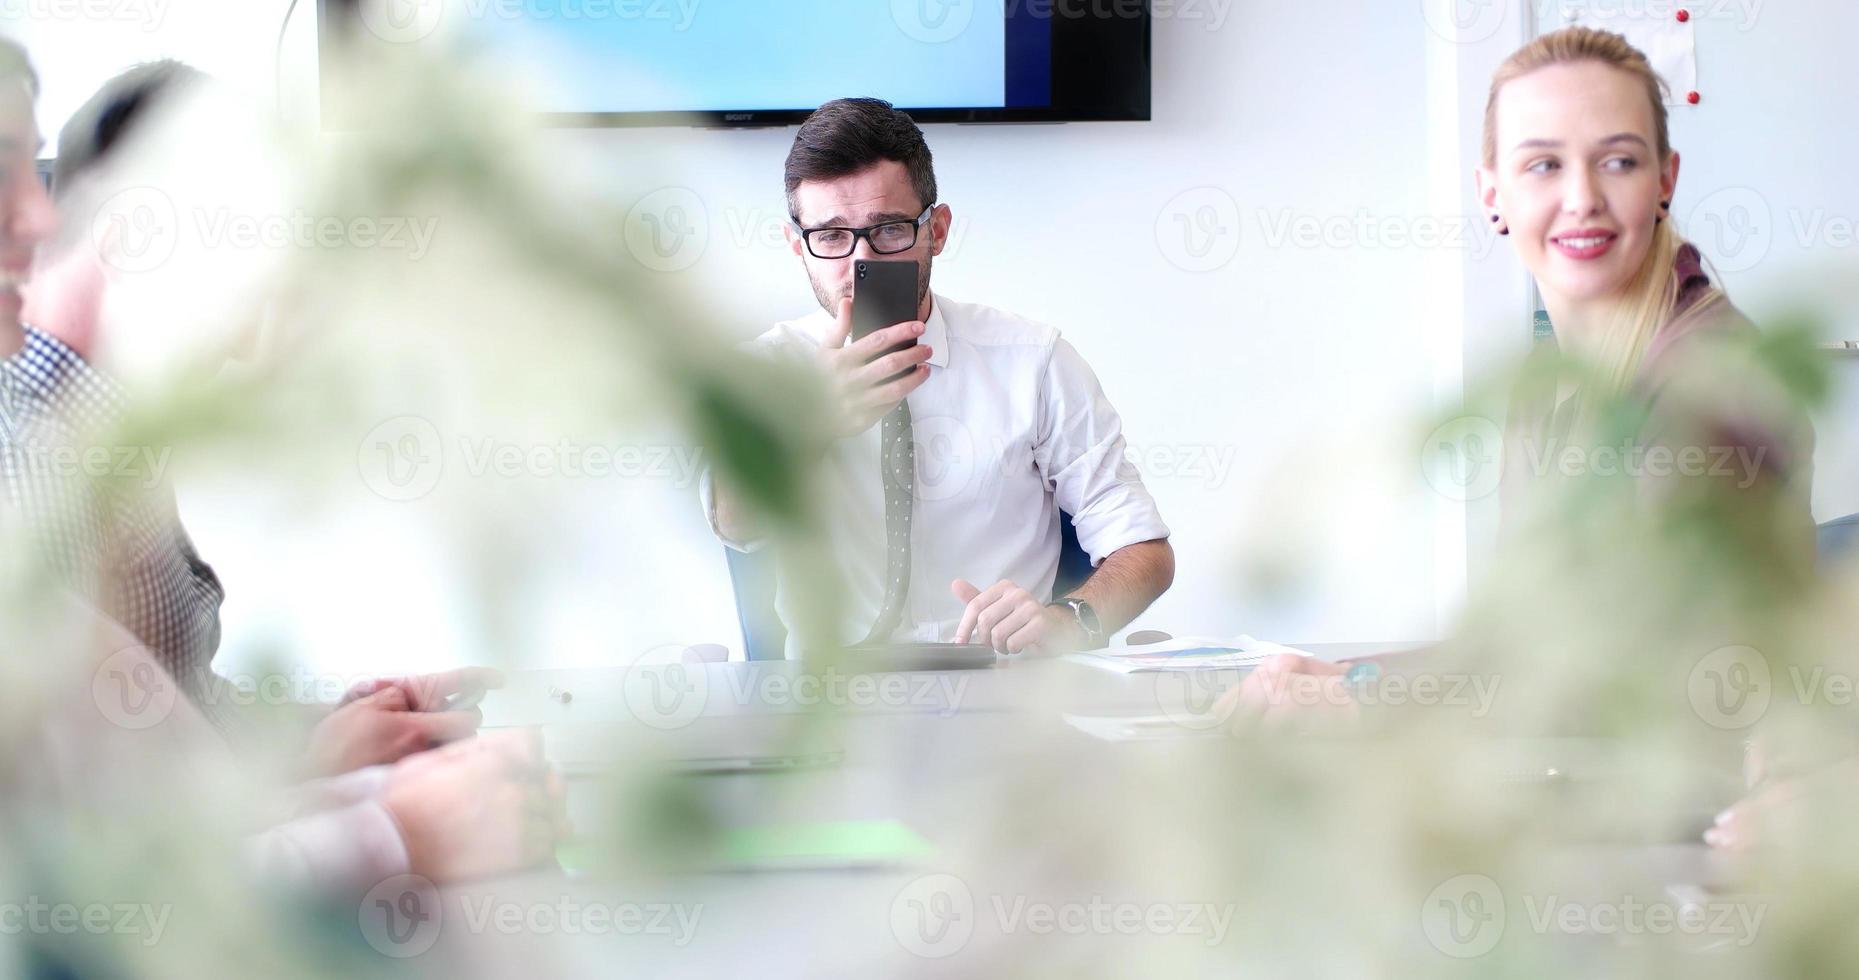 group of business man on meeting photo